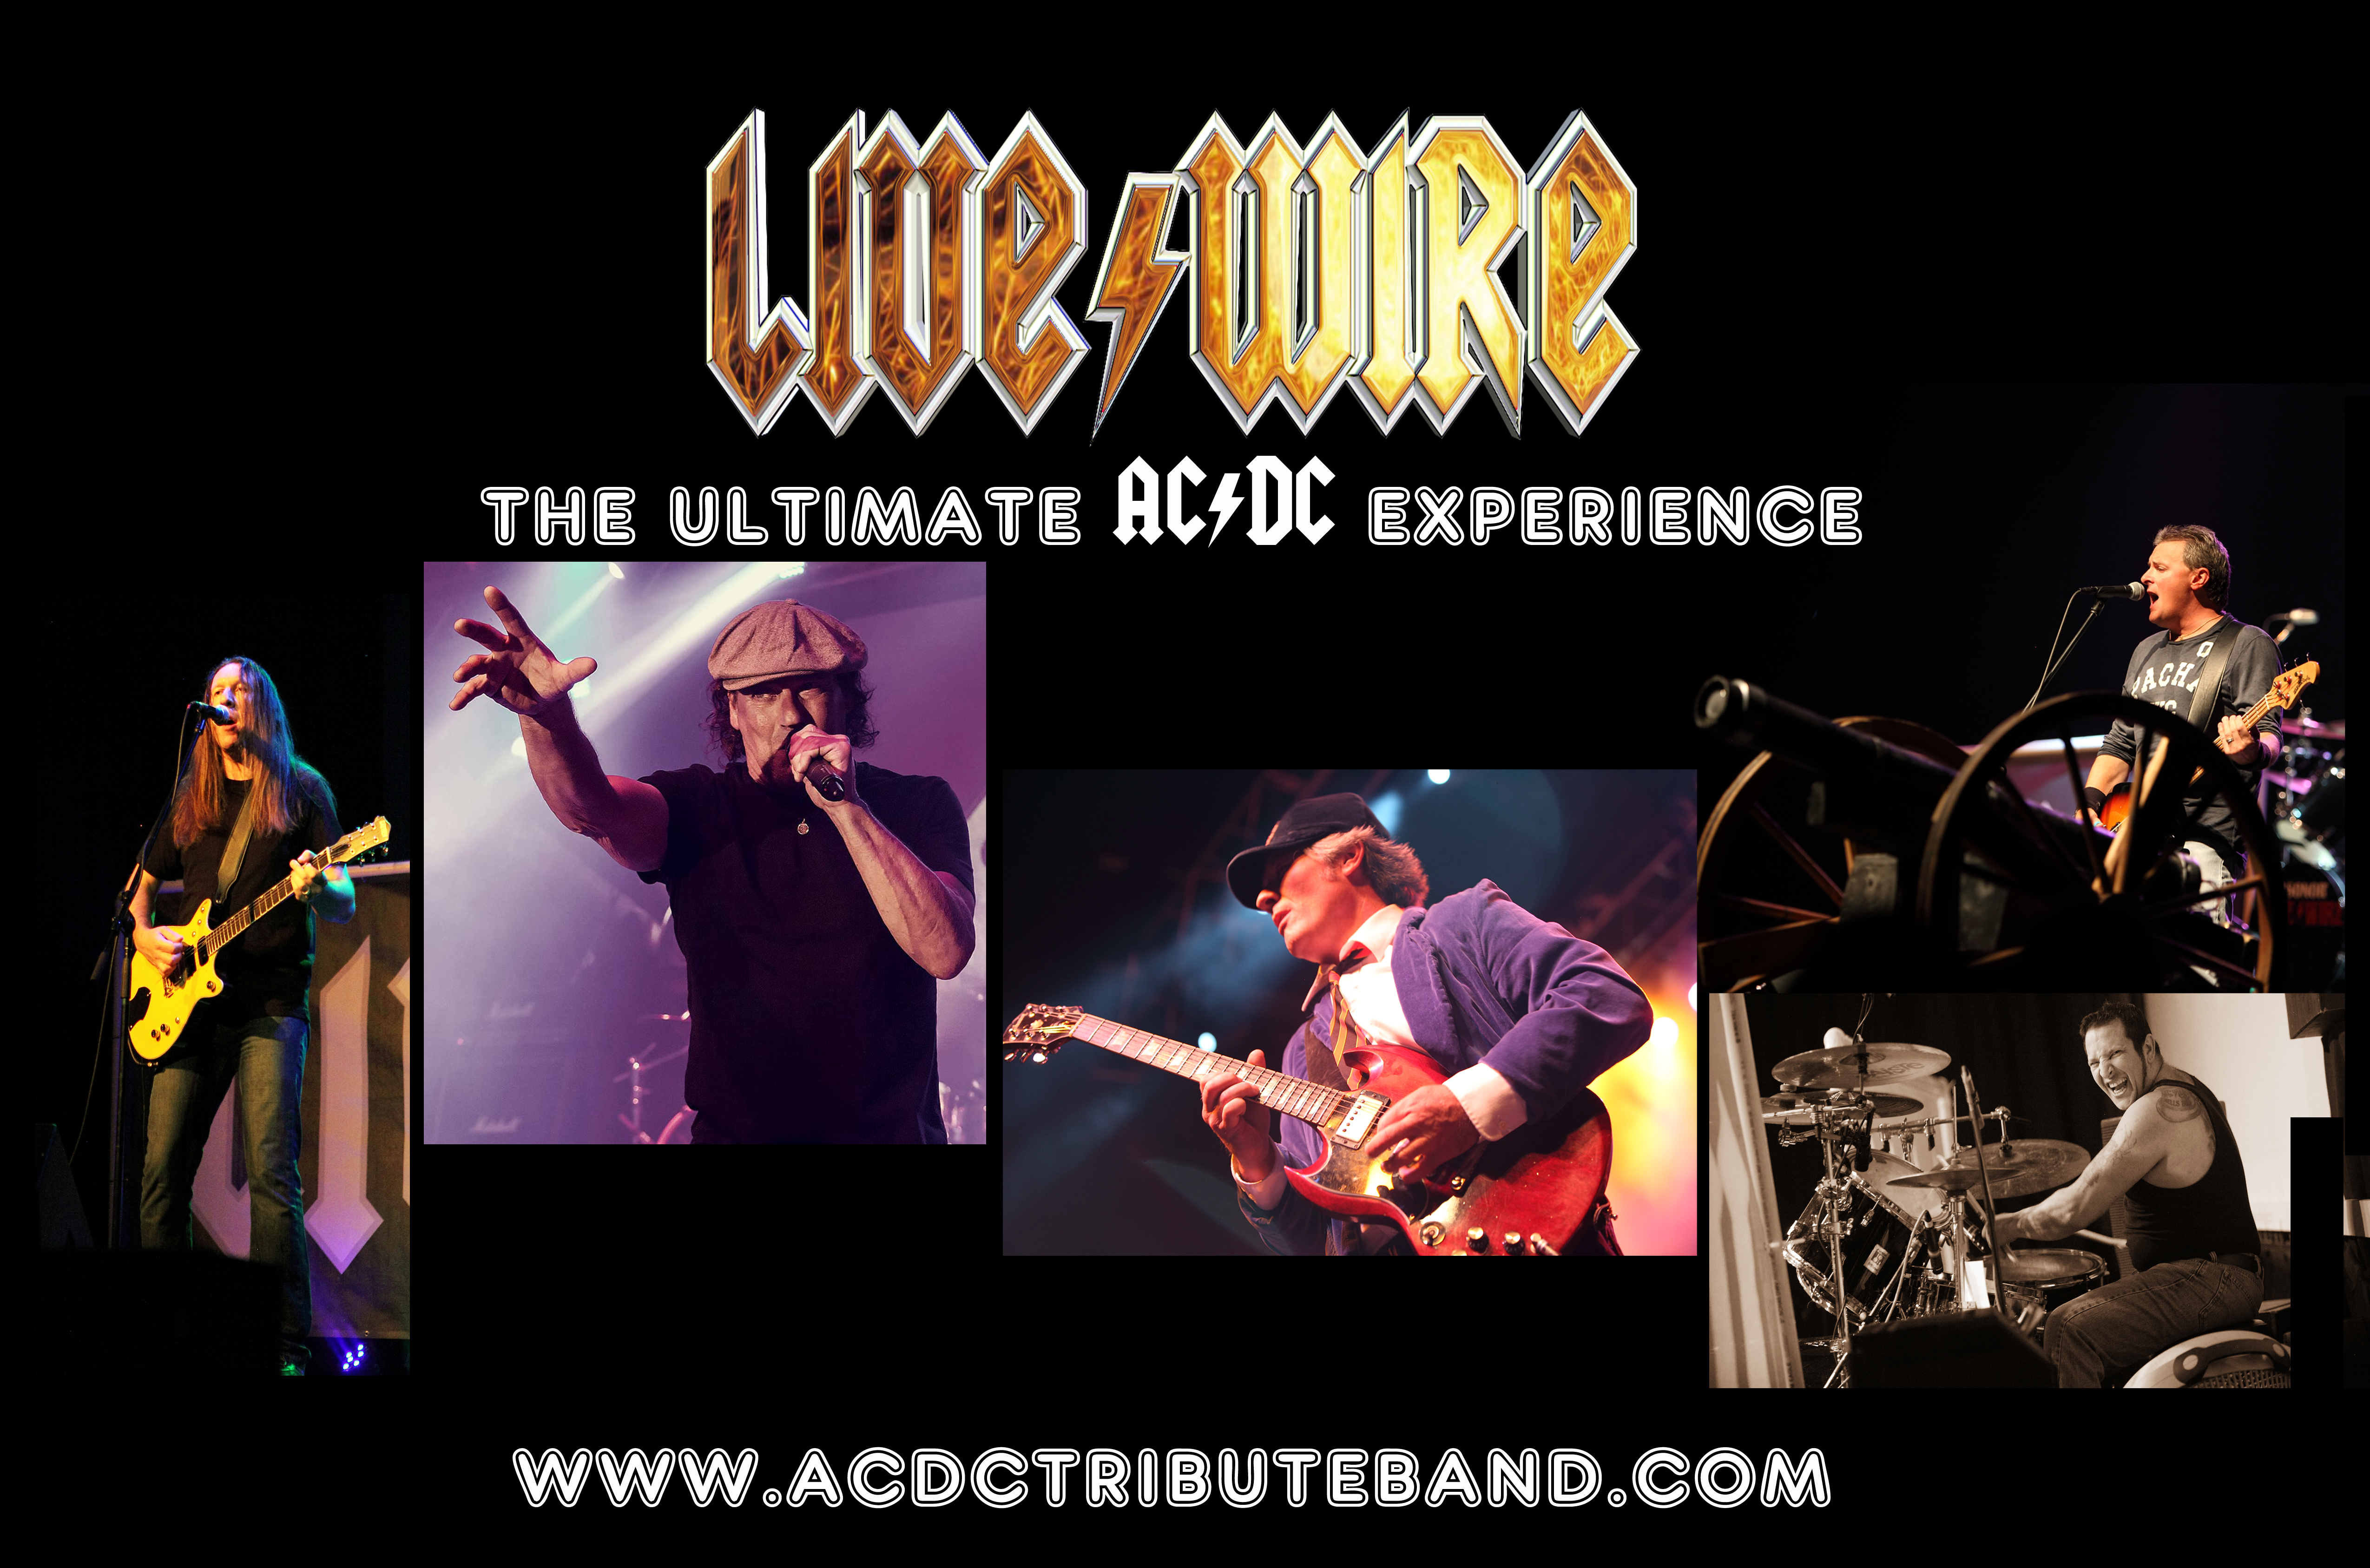 Meaning of Live Wire by AC/DC